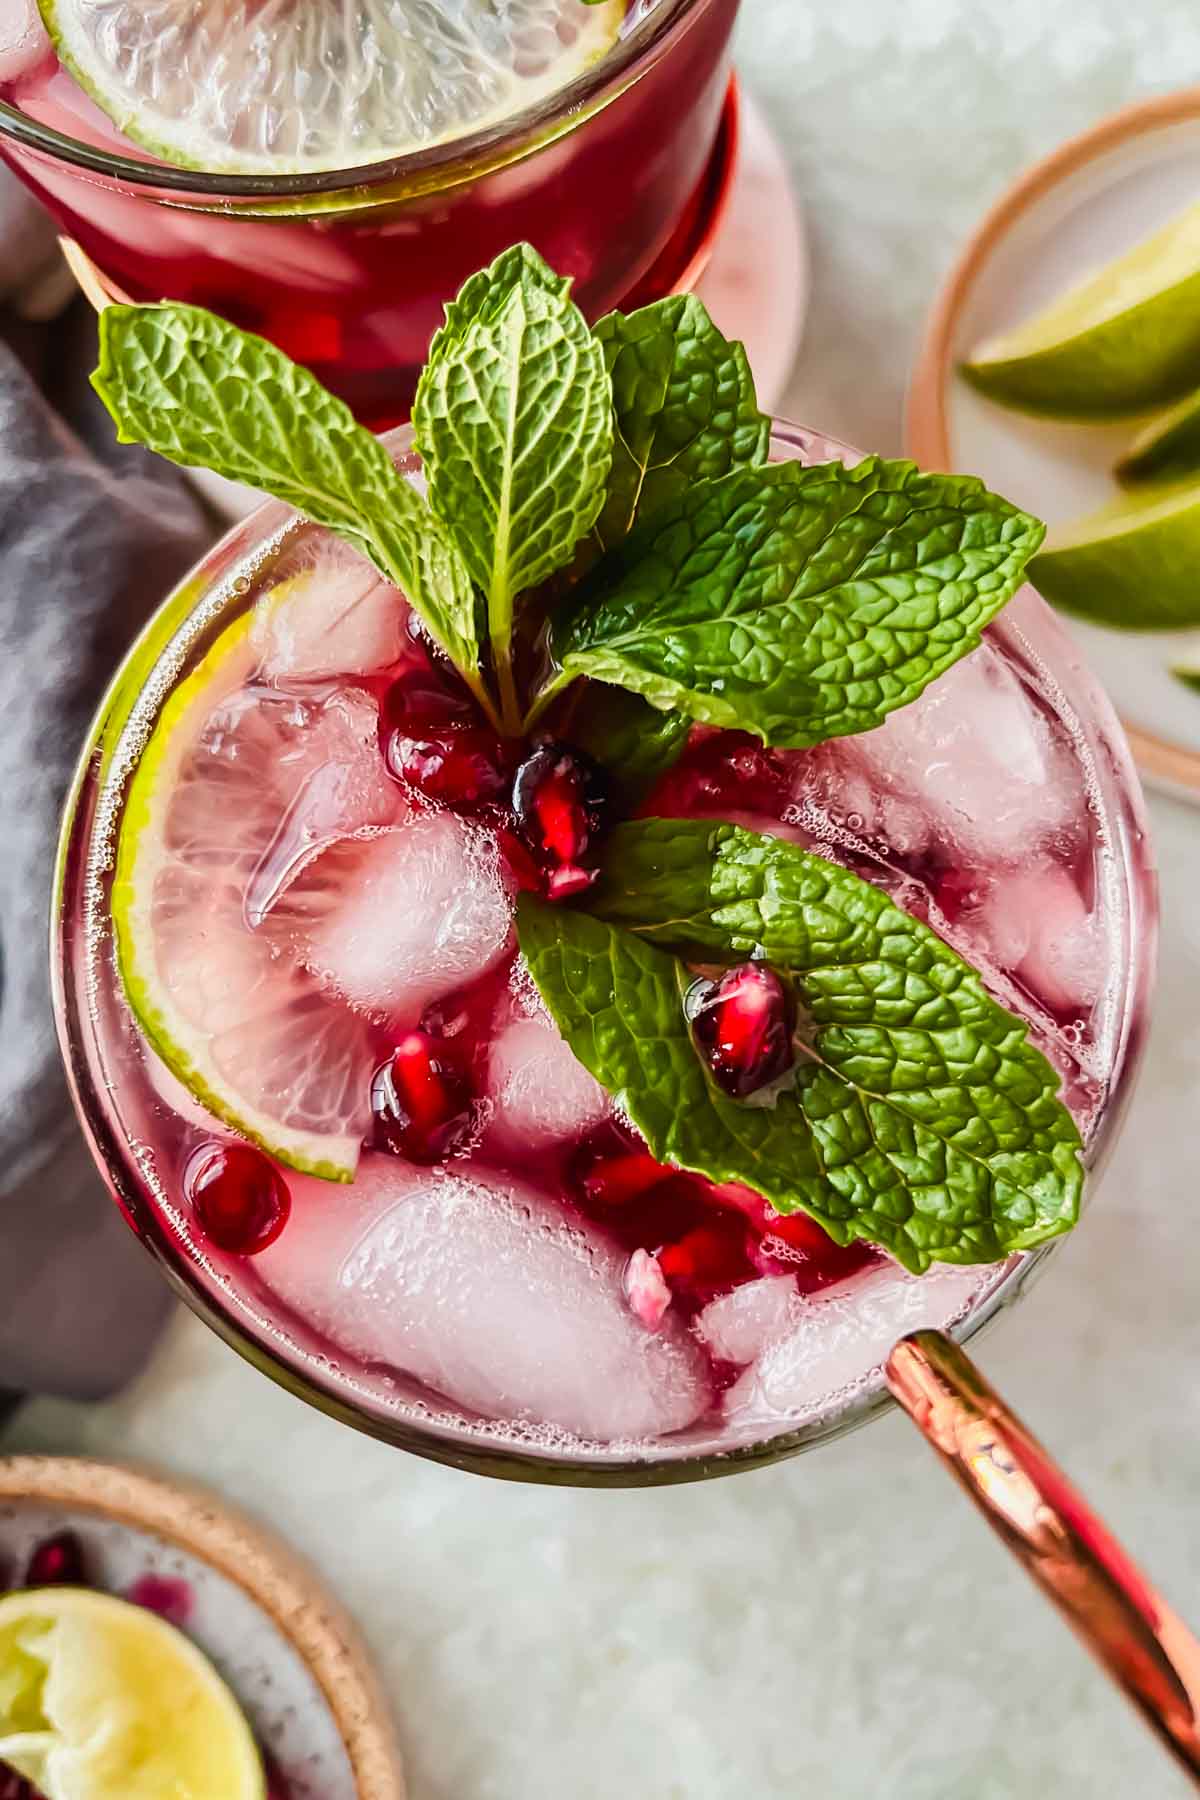 pomegranate moscow mule in copper mug garnished with fresh mint and pomegranate seeds.